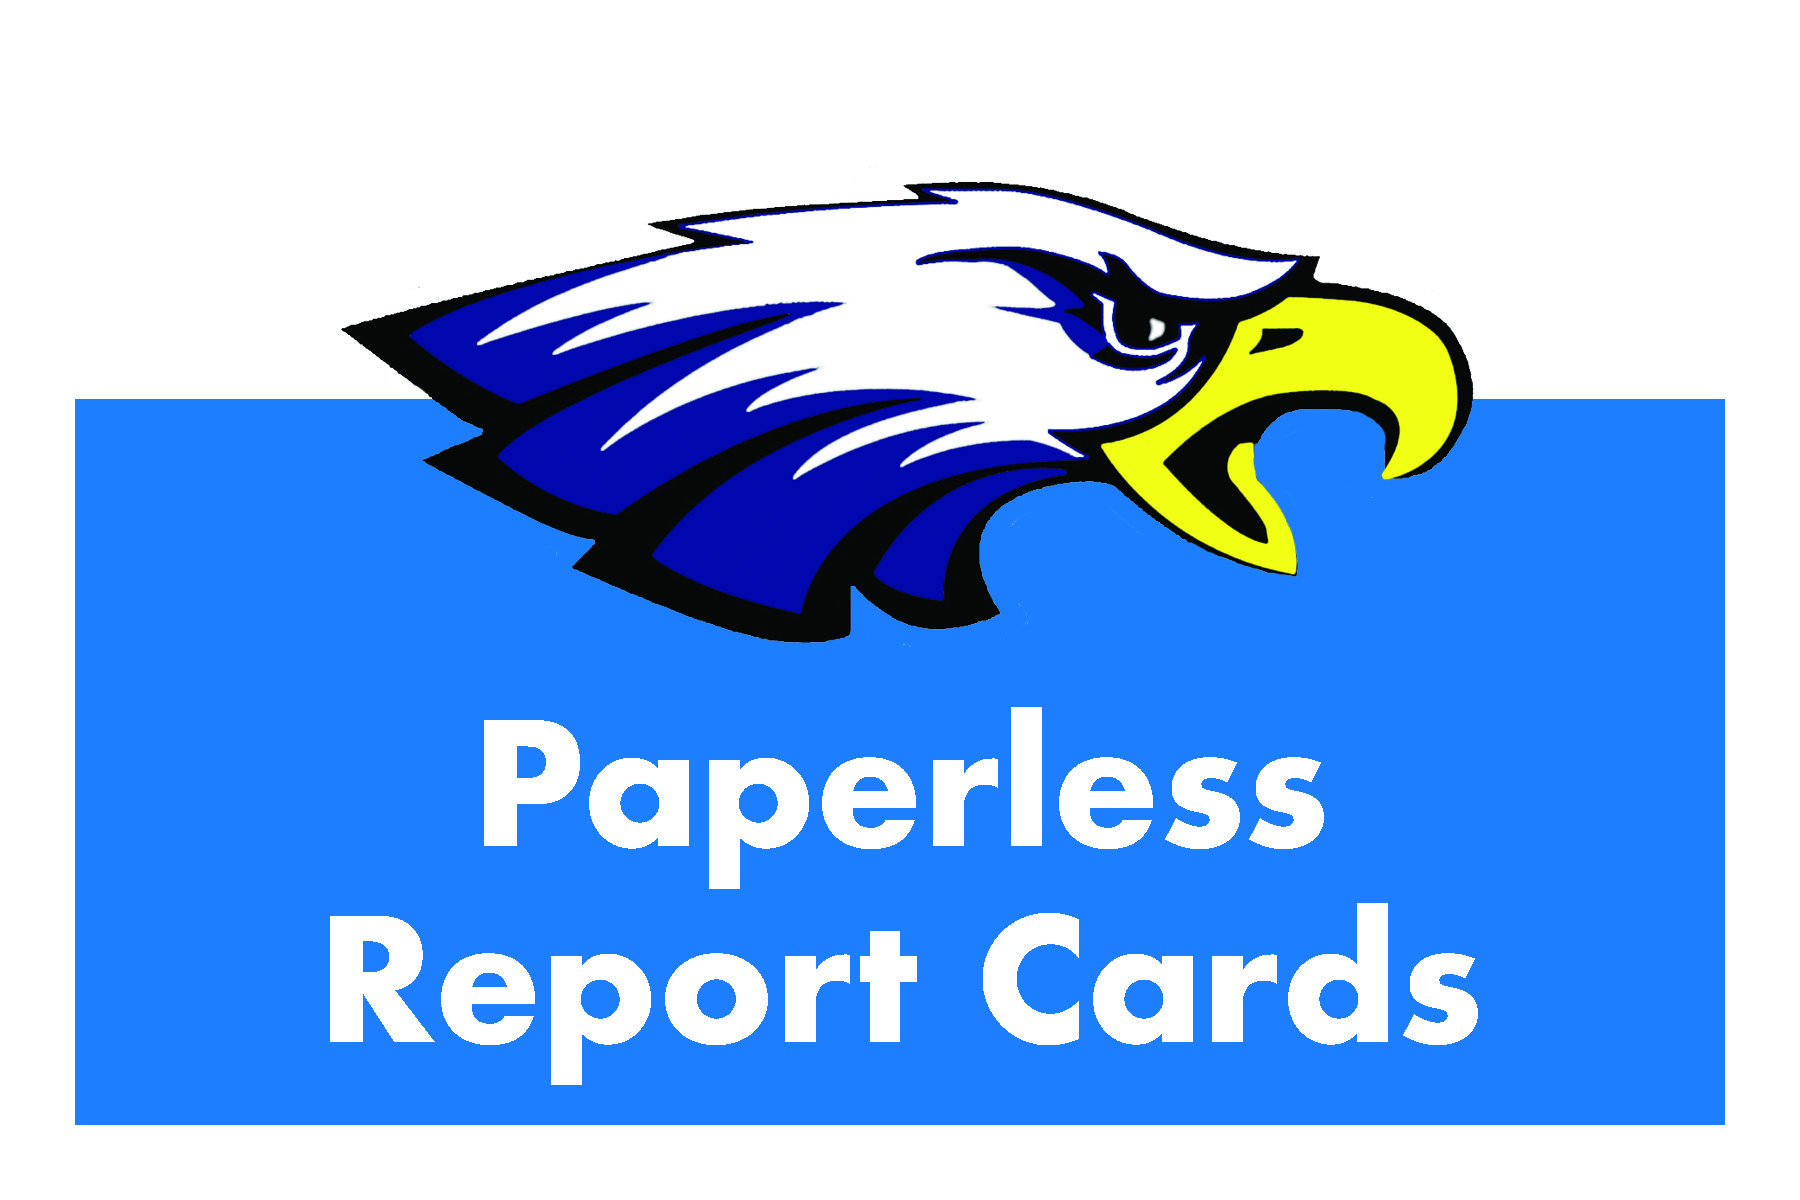 Paperless Report Cards